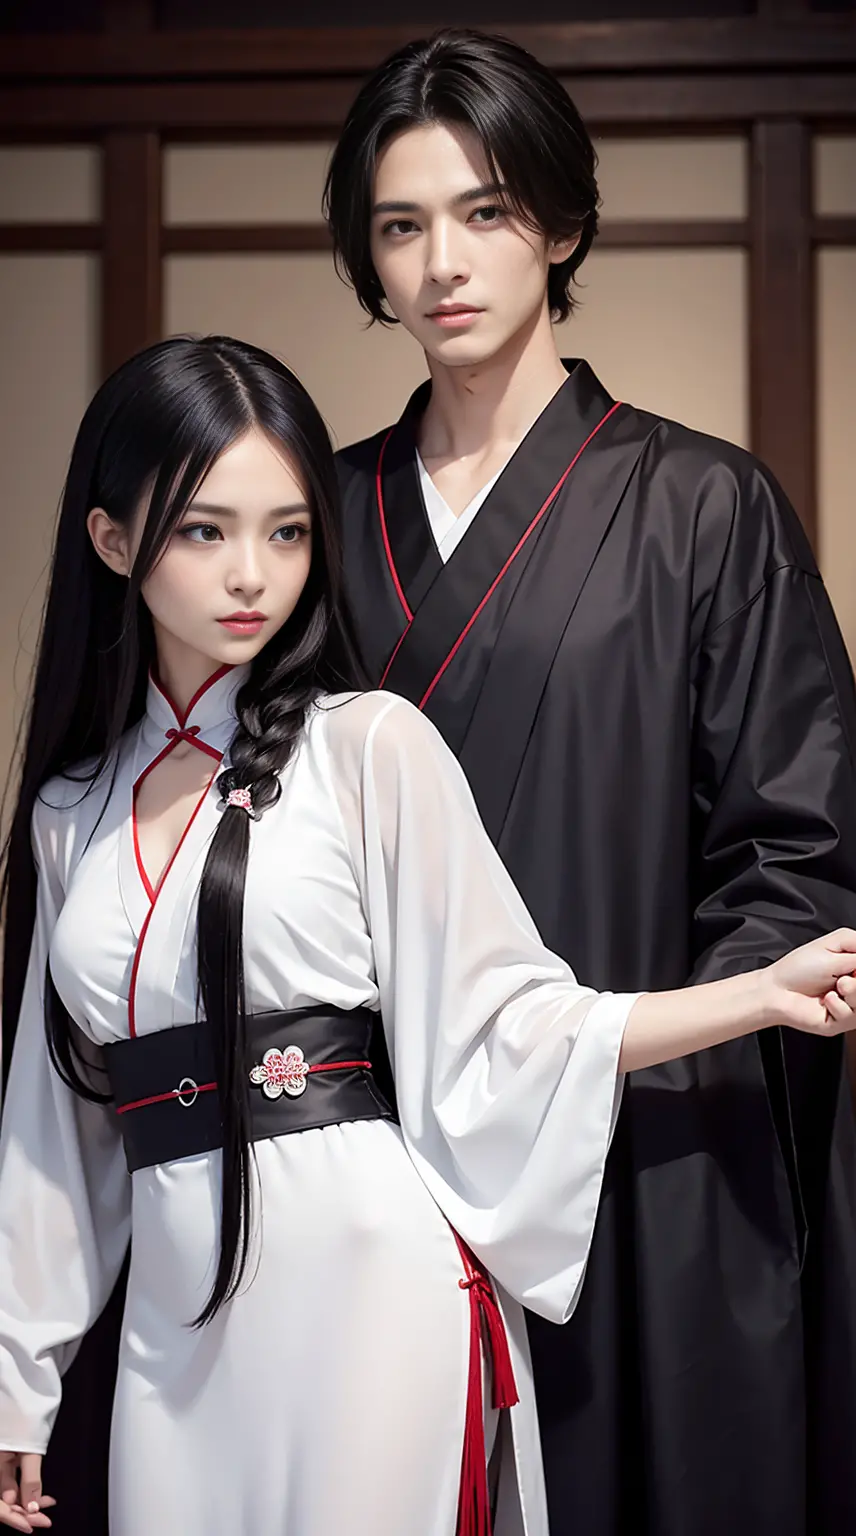 A man on the left is holding a woman on the right. The man looks handsome with a slender physique and is wearing hanfu black clo...